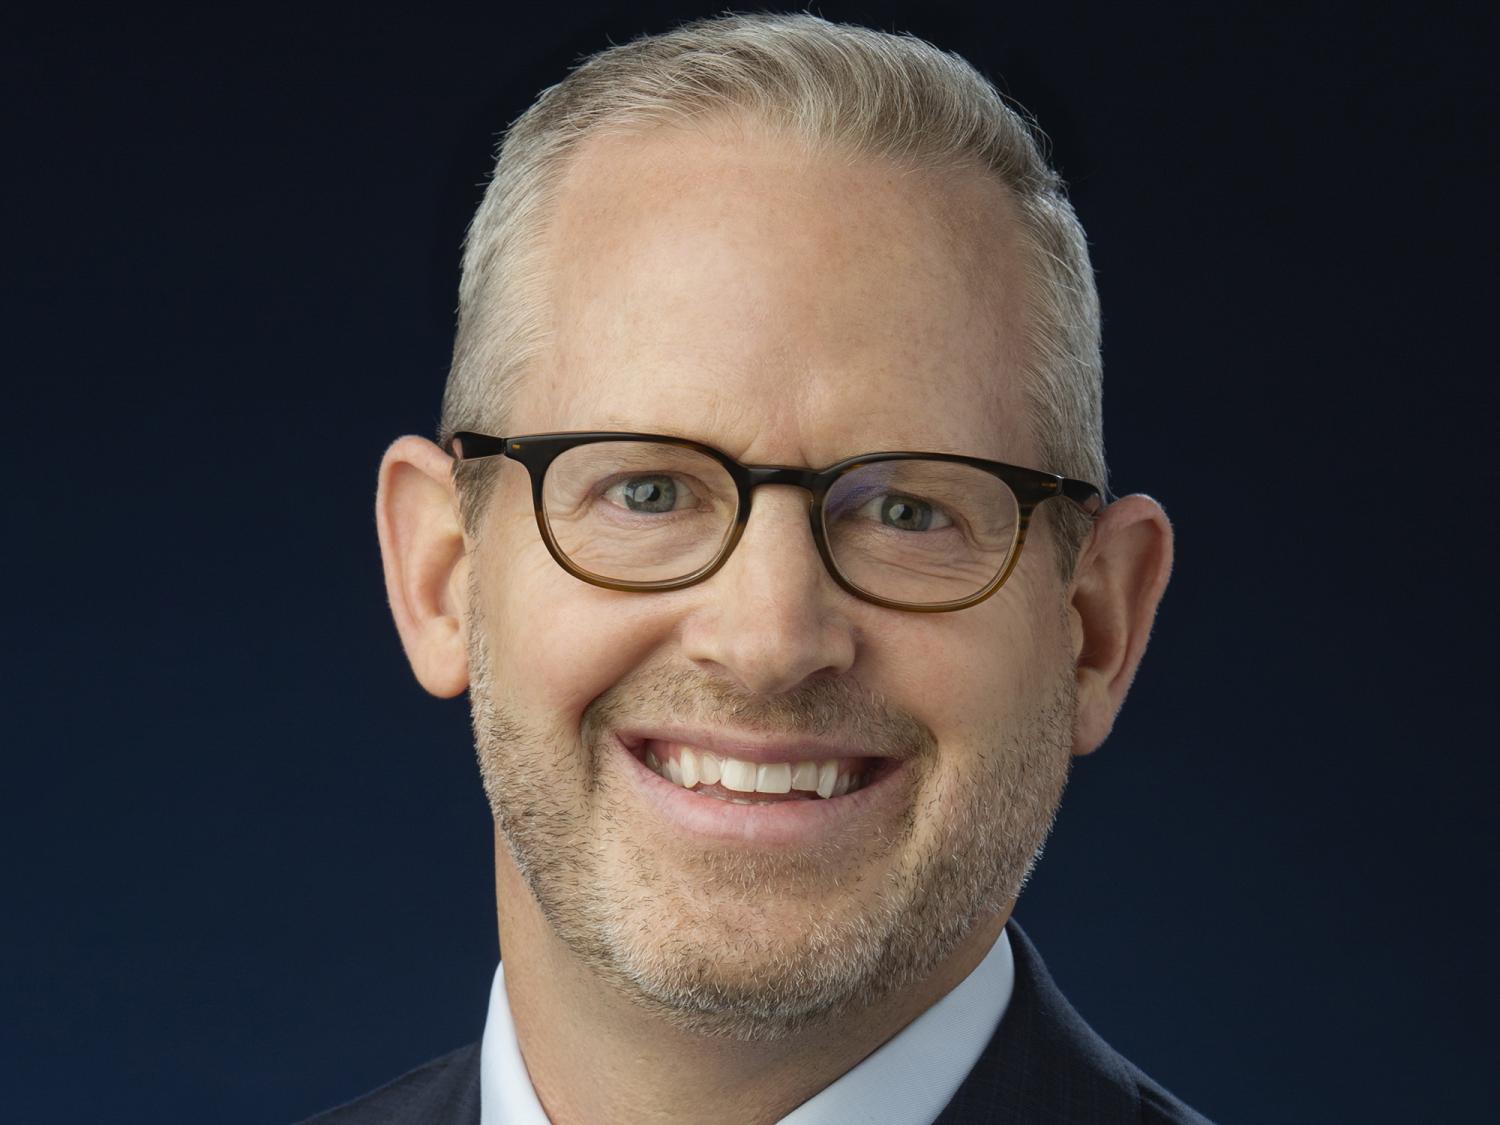 A headshot image of new Smeal College of Business Dean Corey Phelps